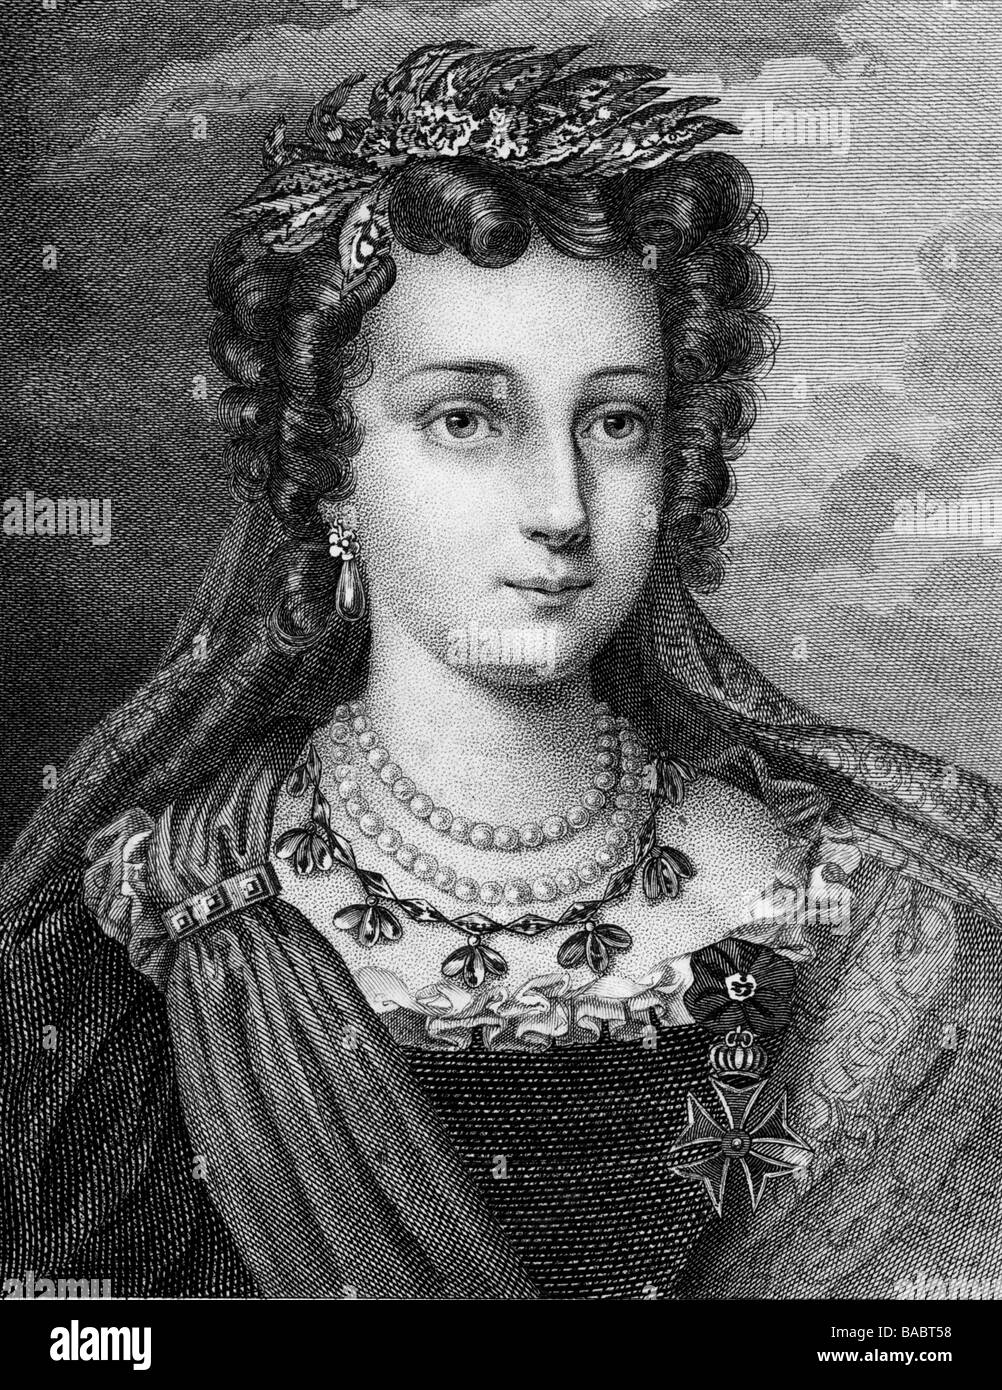 Maria II. 'da Gloria', 4.4.1819 - 15.11.1853, Queen of Portugal 5.5.1826 - 30.6.1828 & 26.5.1834 - 15.11.1853, portrait, steel engraving by Hofbauer and Stöber after drawing, Artist's Copyright has not to be cleared Stock Photo